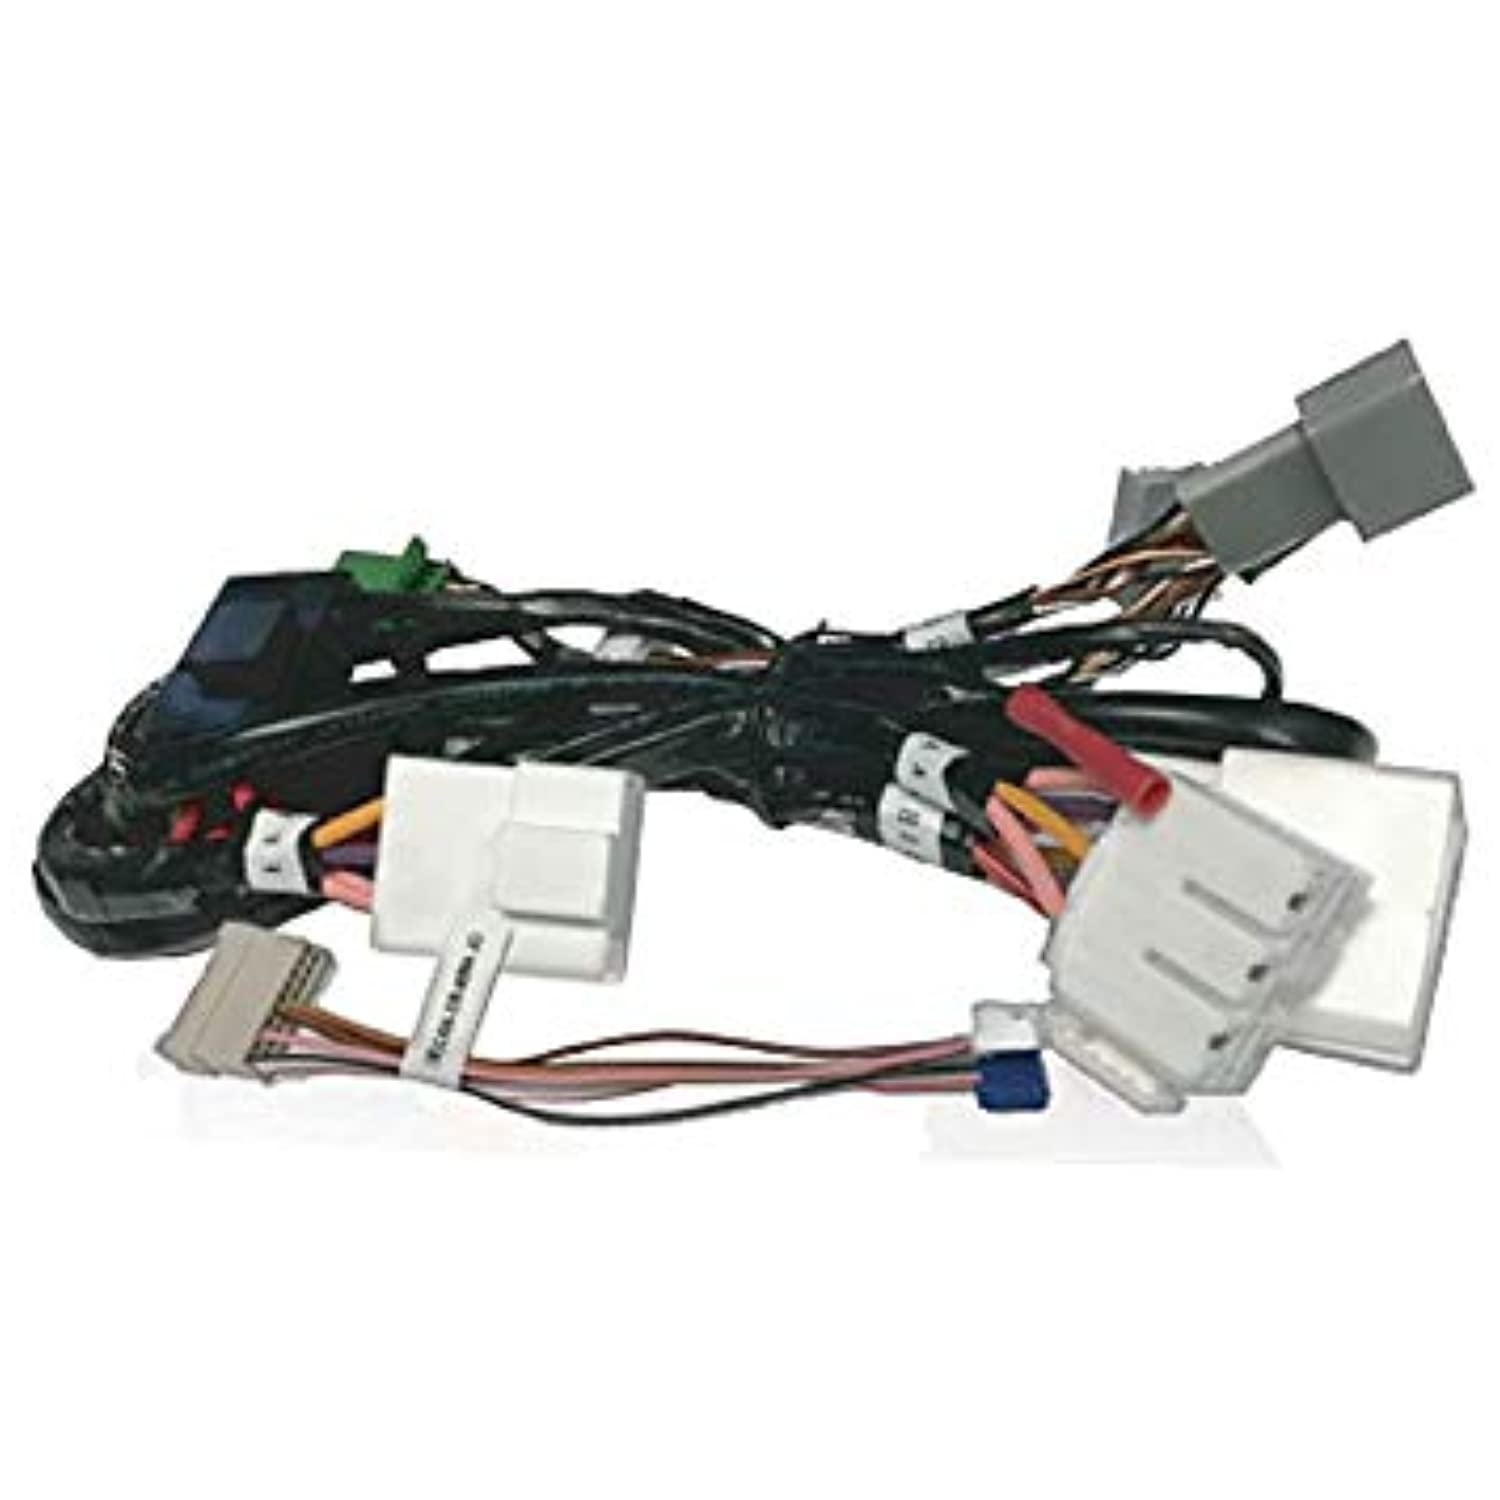 OLADSTHRHA10 Remote start T-harness for select 2014-up Honda and Acura vehicles